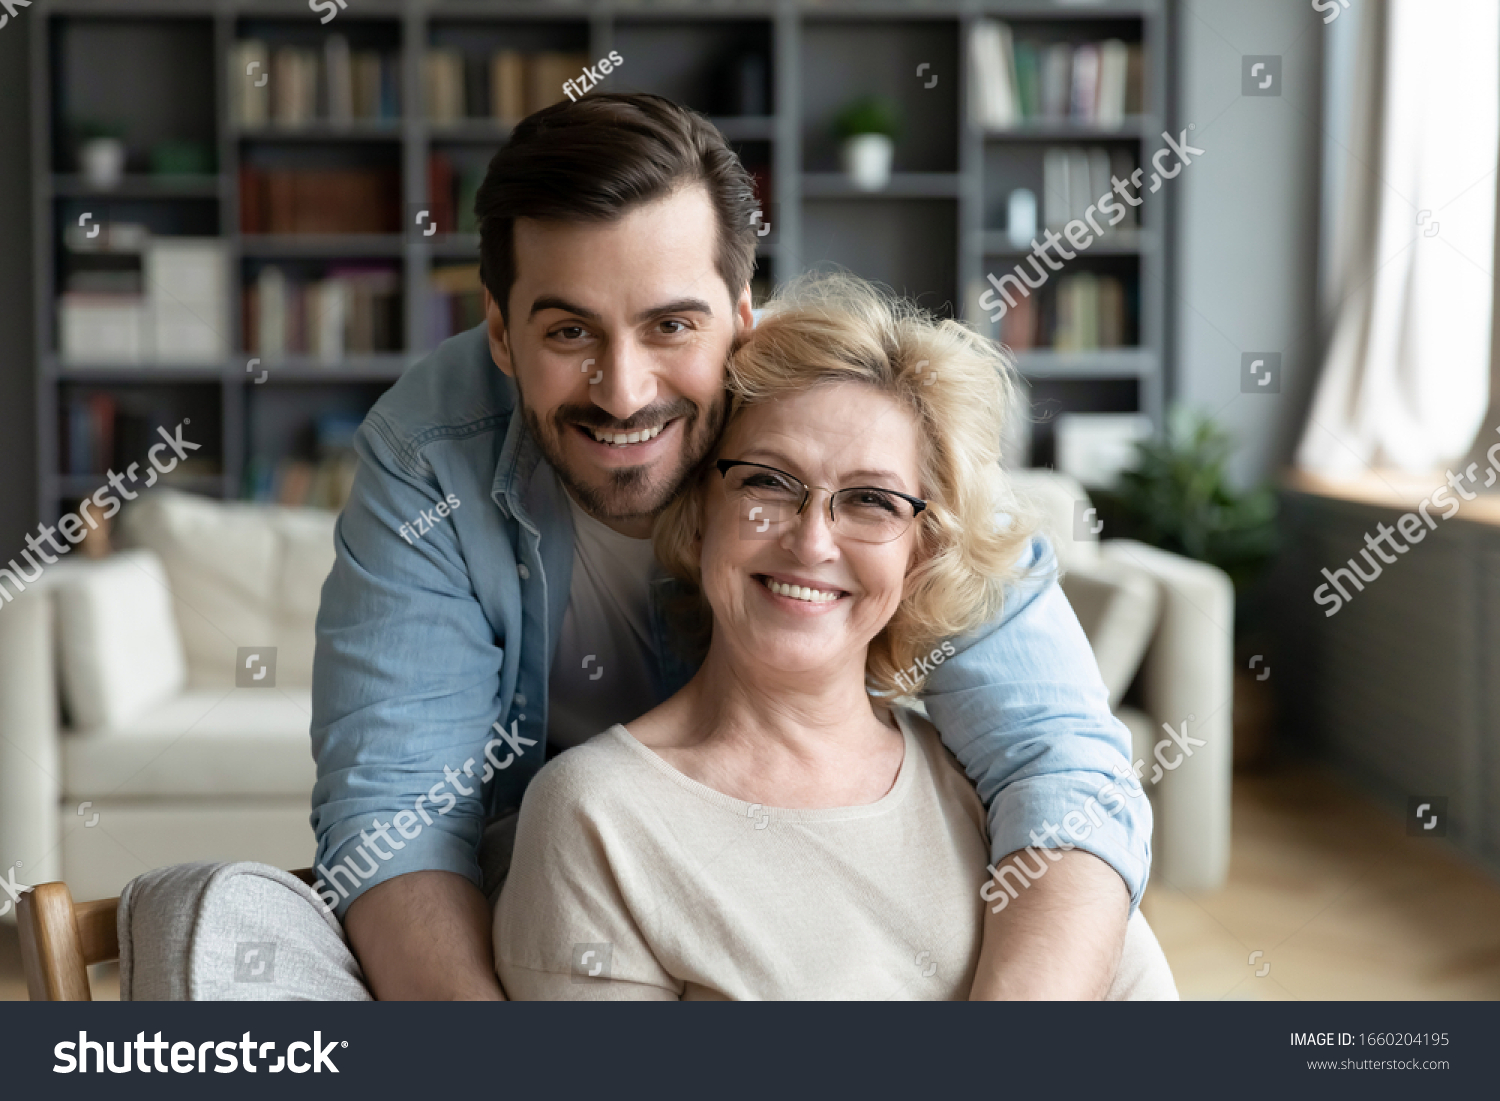 Portrait of grateful adult man hug smiling middle-aged mother show love and care, thankful happy grown-up son in embrace senior 70s mom, enjoy weekend family time at home together, bonding concept #1660204195